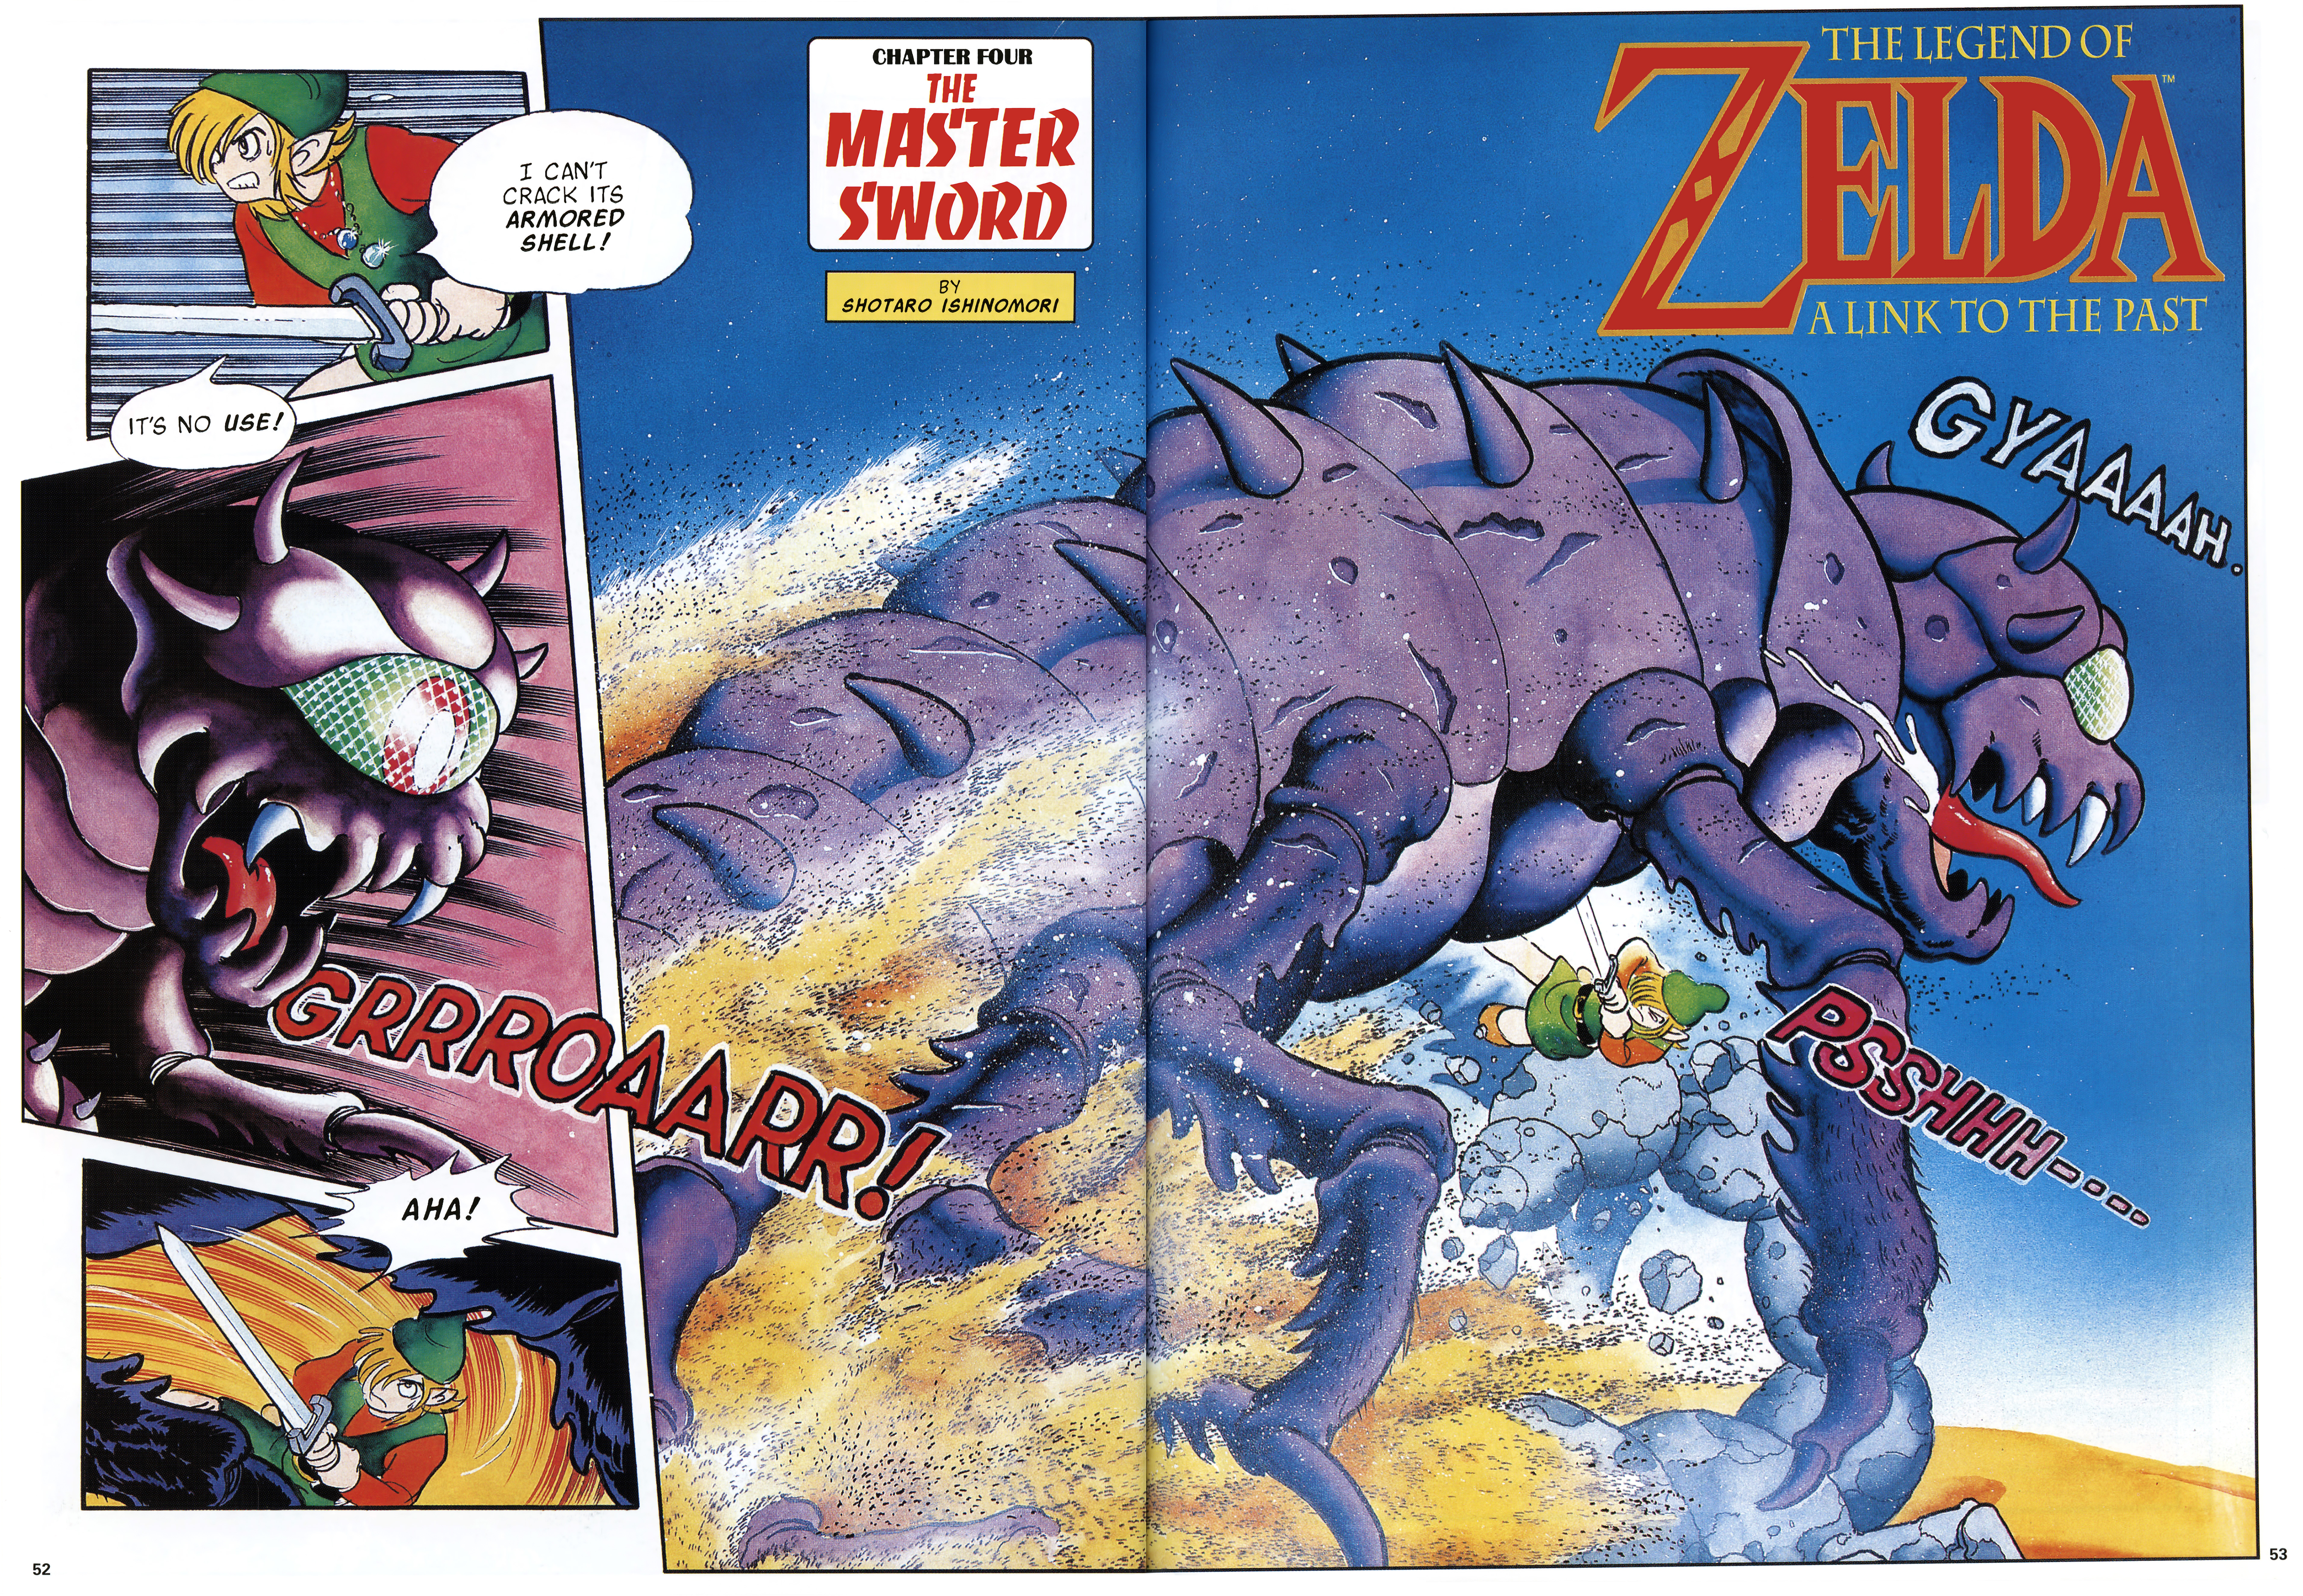 Read online The Legend of Zelda: A Link To the Past comic -  Issue # TPB (Part 1) - 47